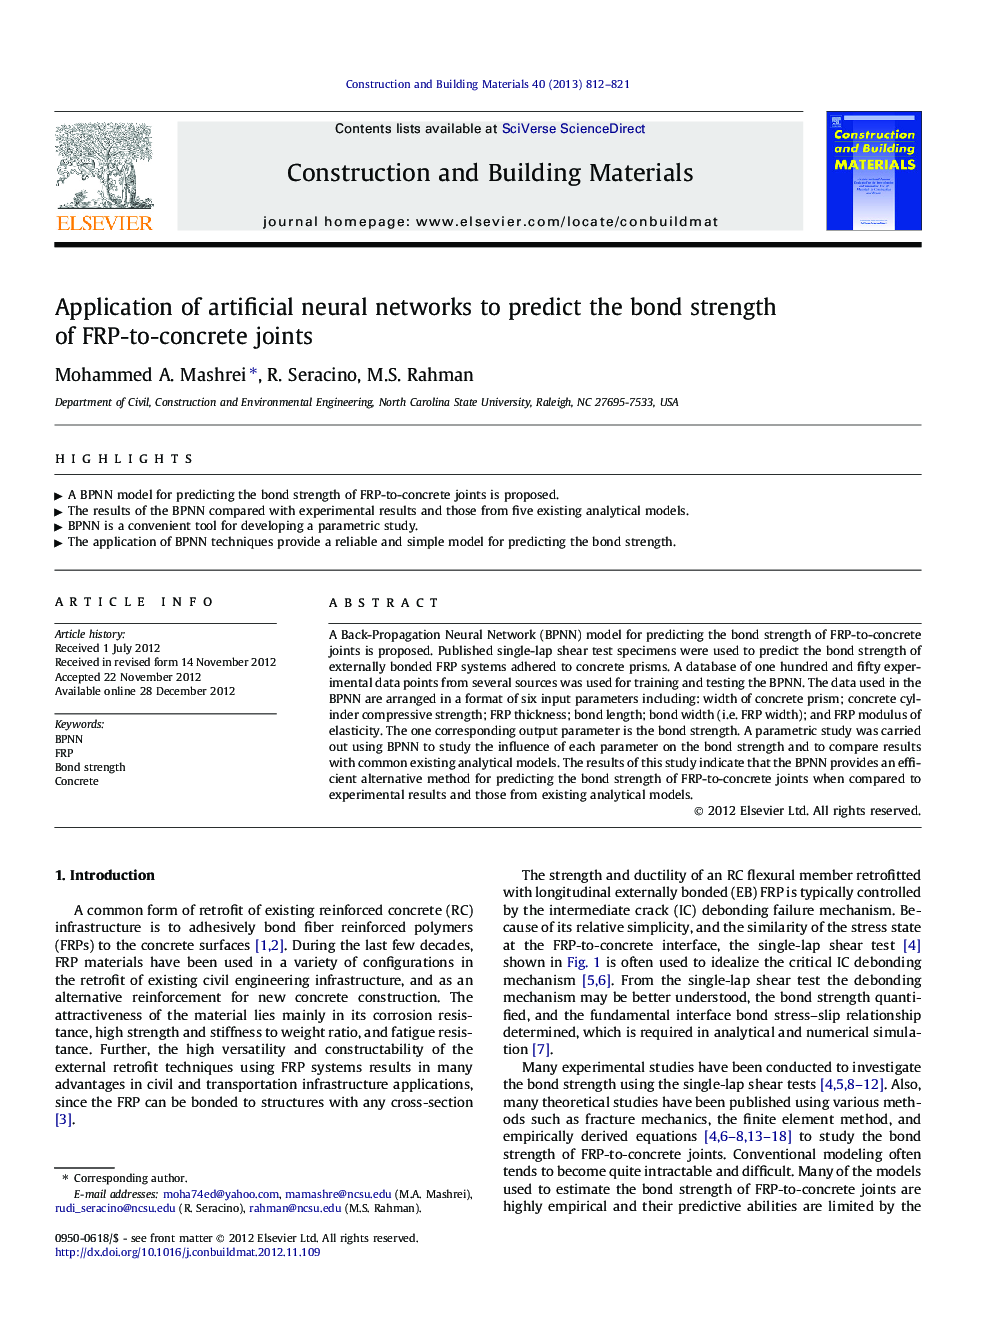 Application of artificial neural networks to predict the bond strength of FRP-to-concrete joints